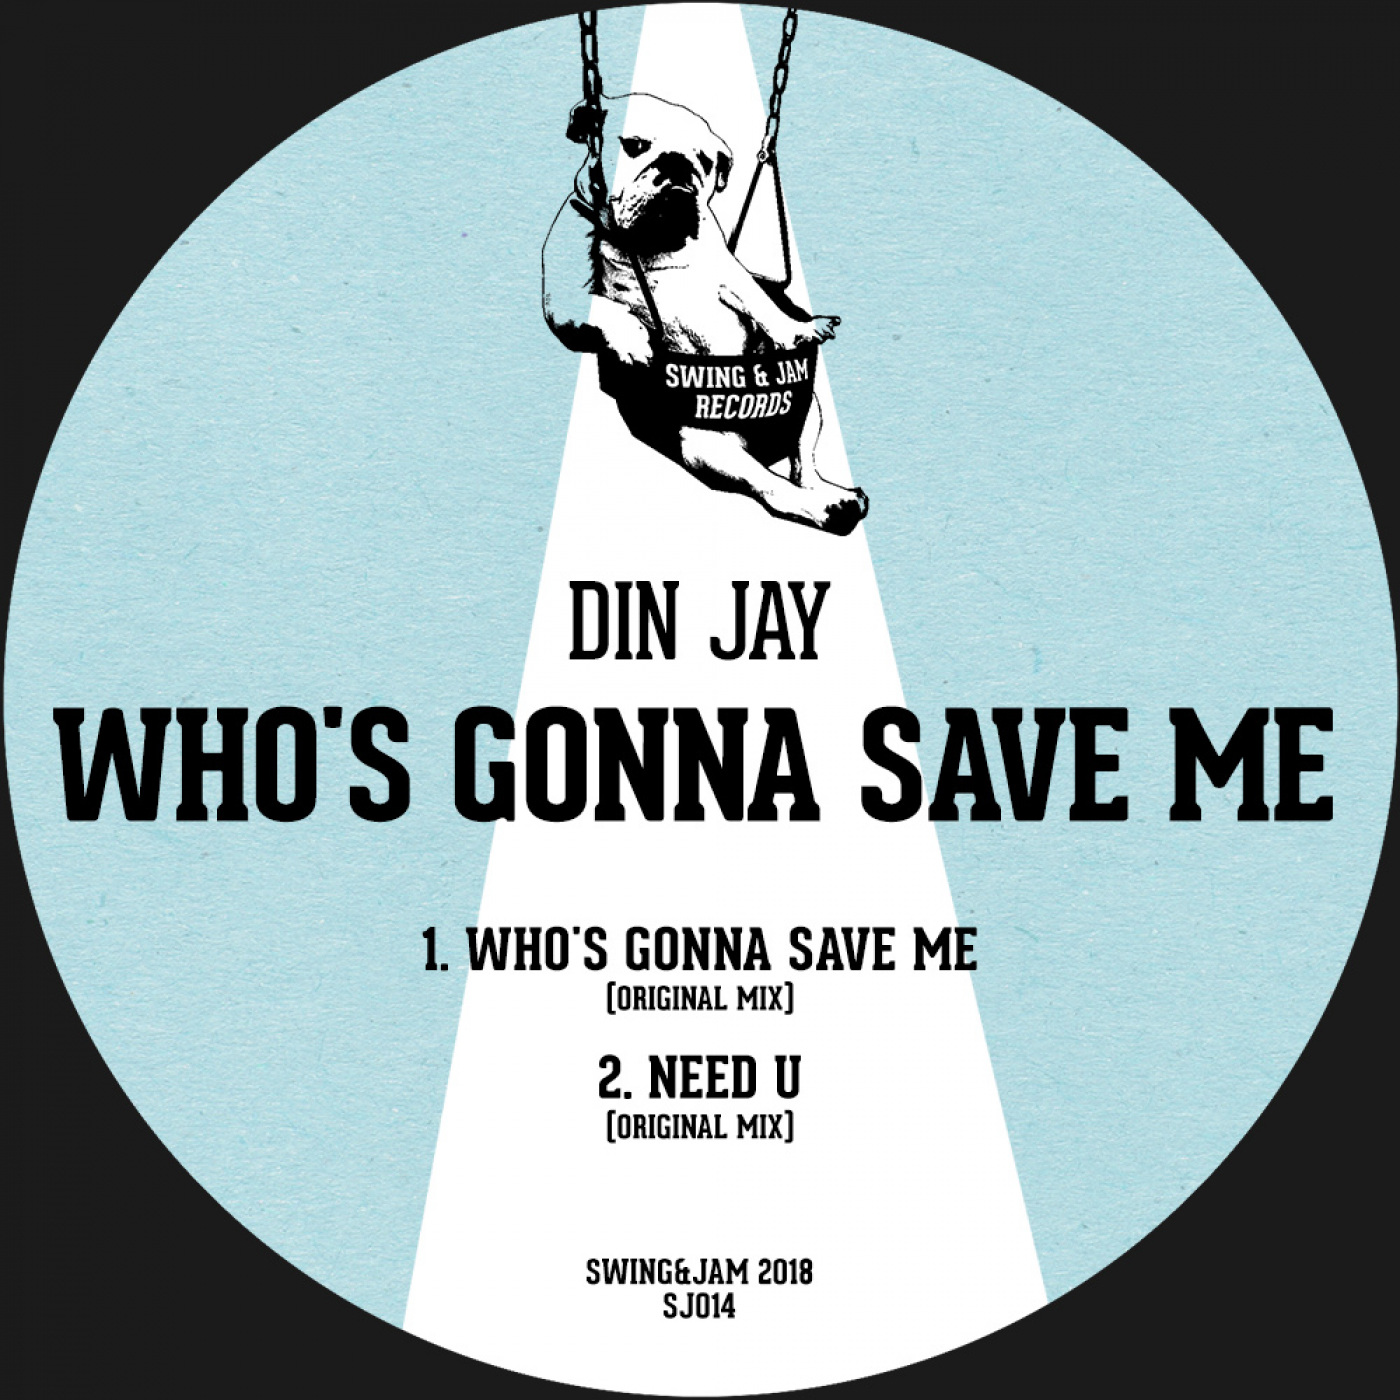 Din Jay - Who's Gonna Save Me / Swing & Jam Records